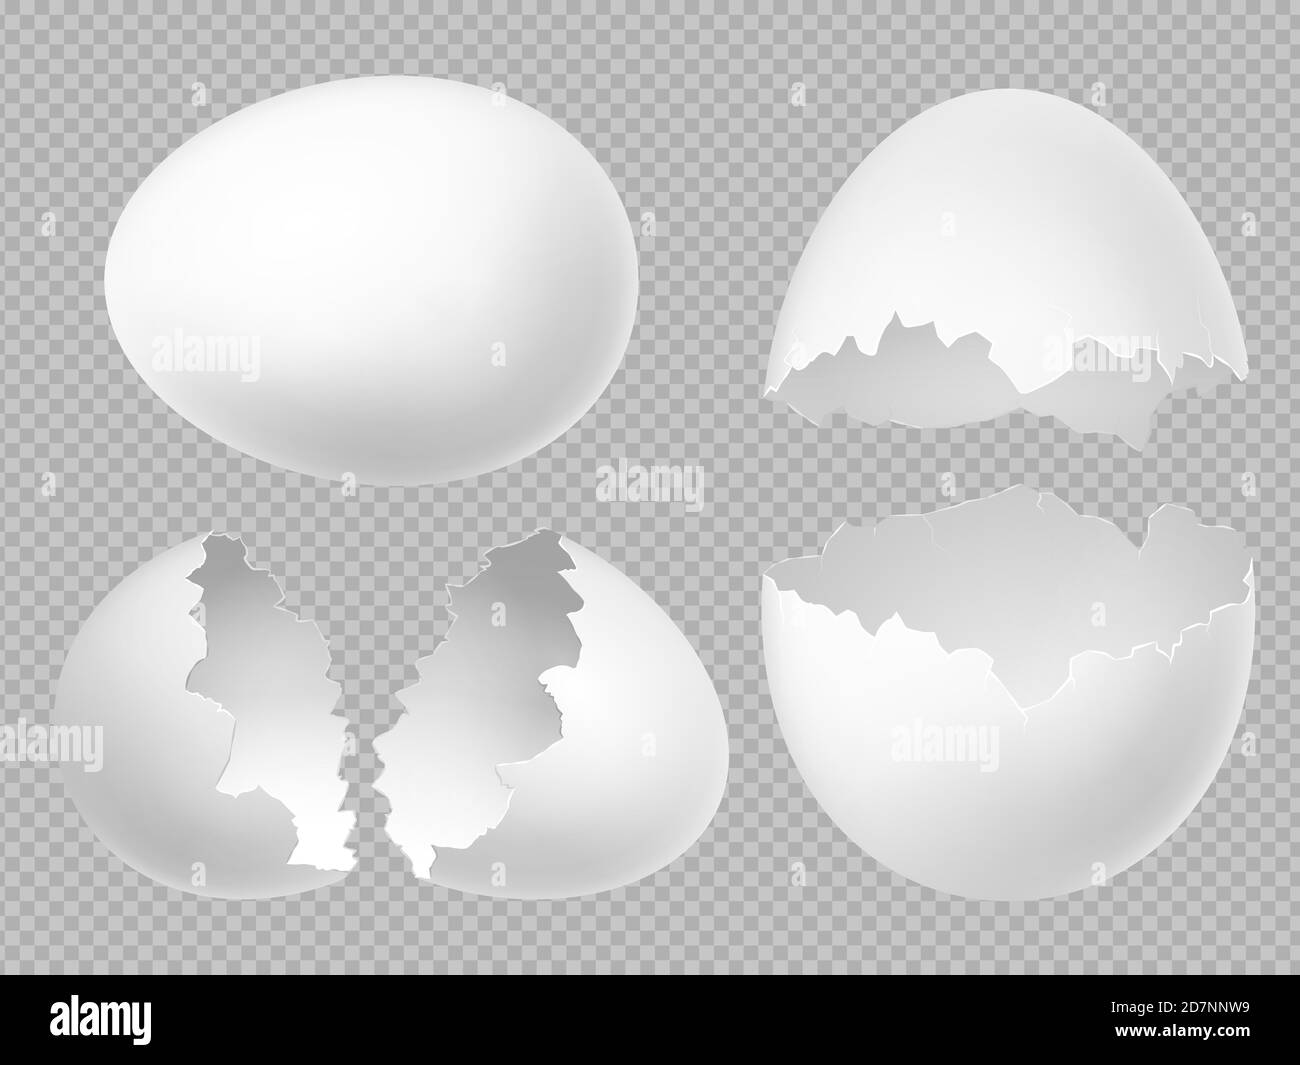 Vector realistic white eggs set with whole and broken eggs isolated on transparent background. Illustration of eggshell, shell from broken egg Stock Vector